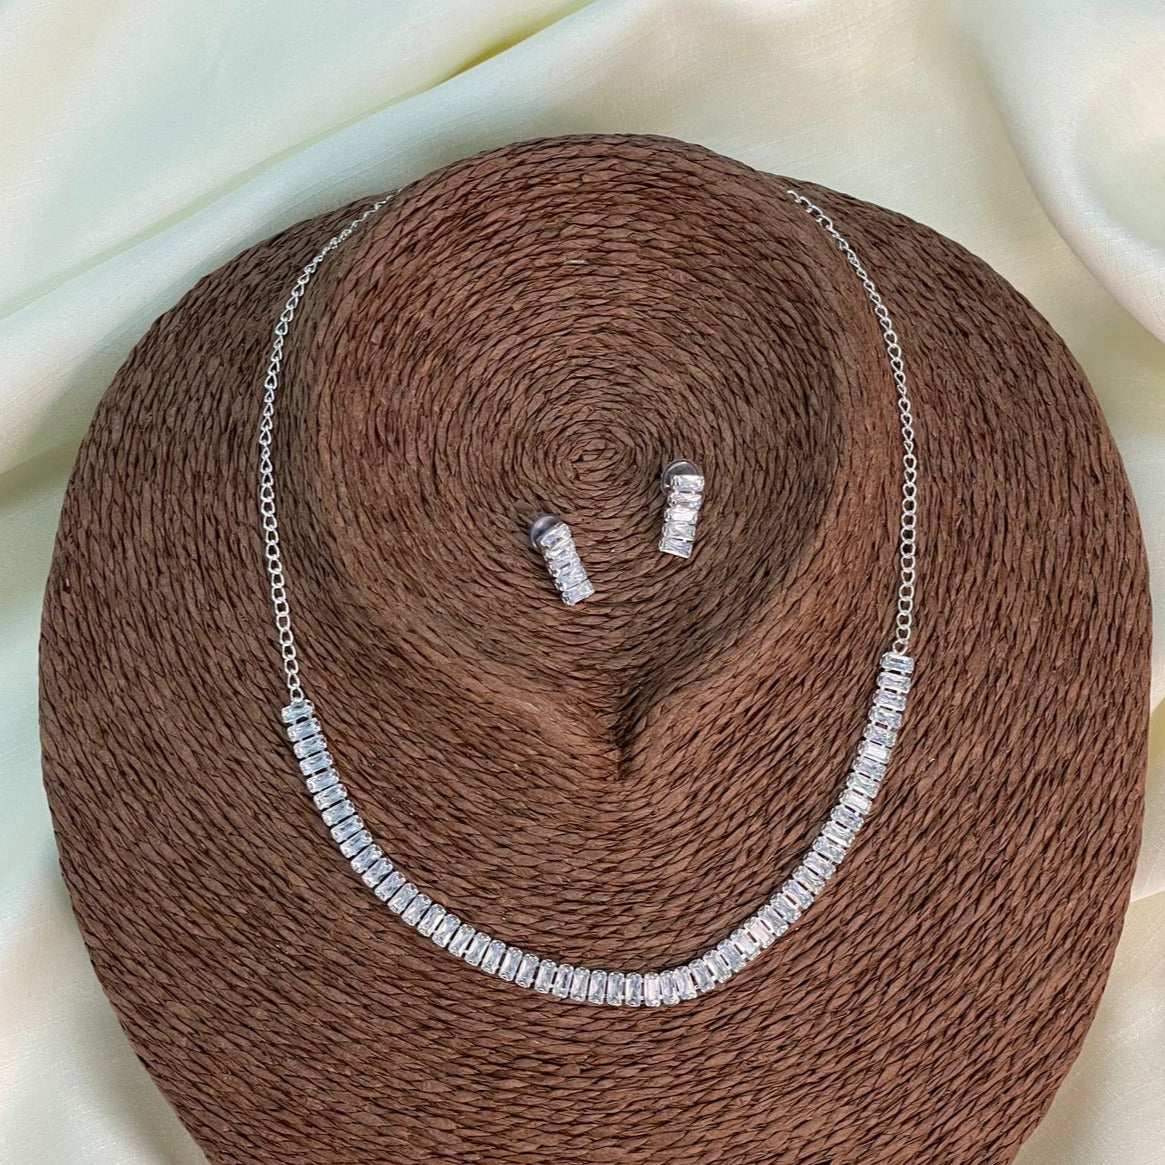 High-Quality Shimmering Silver American Diamond Necklace